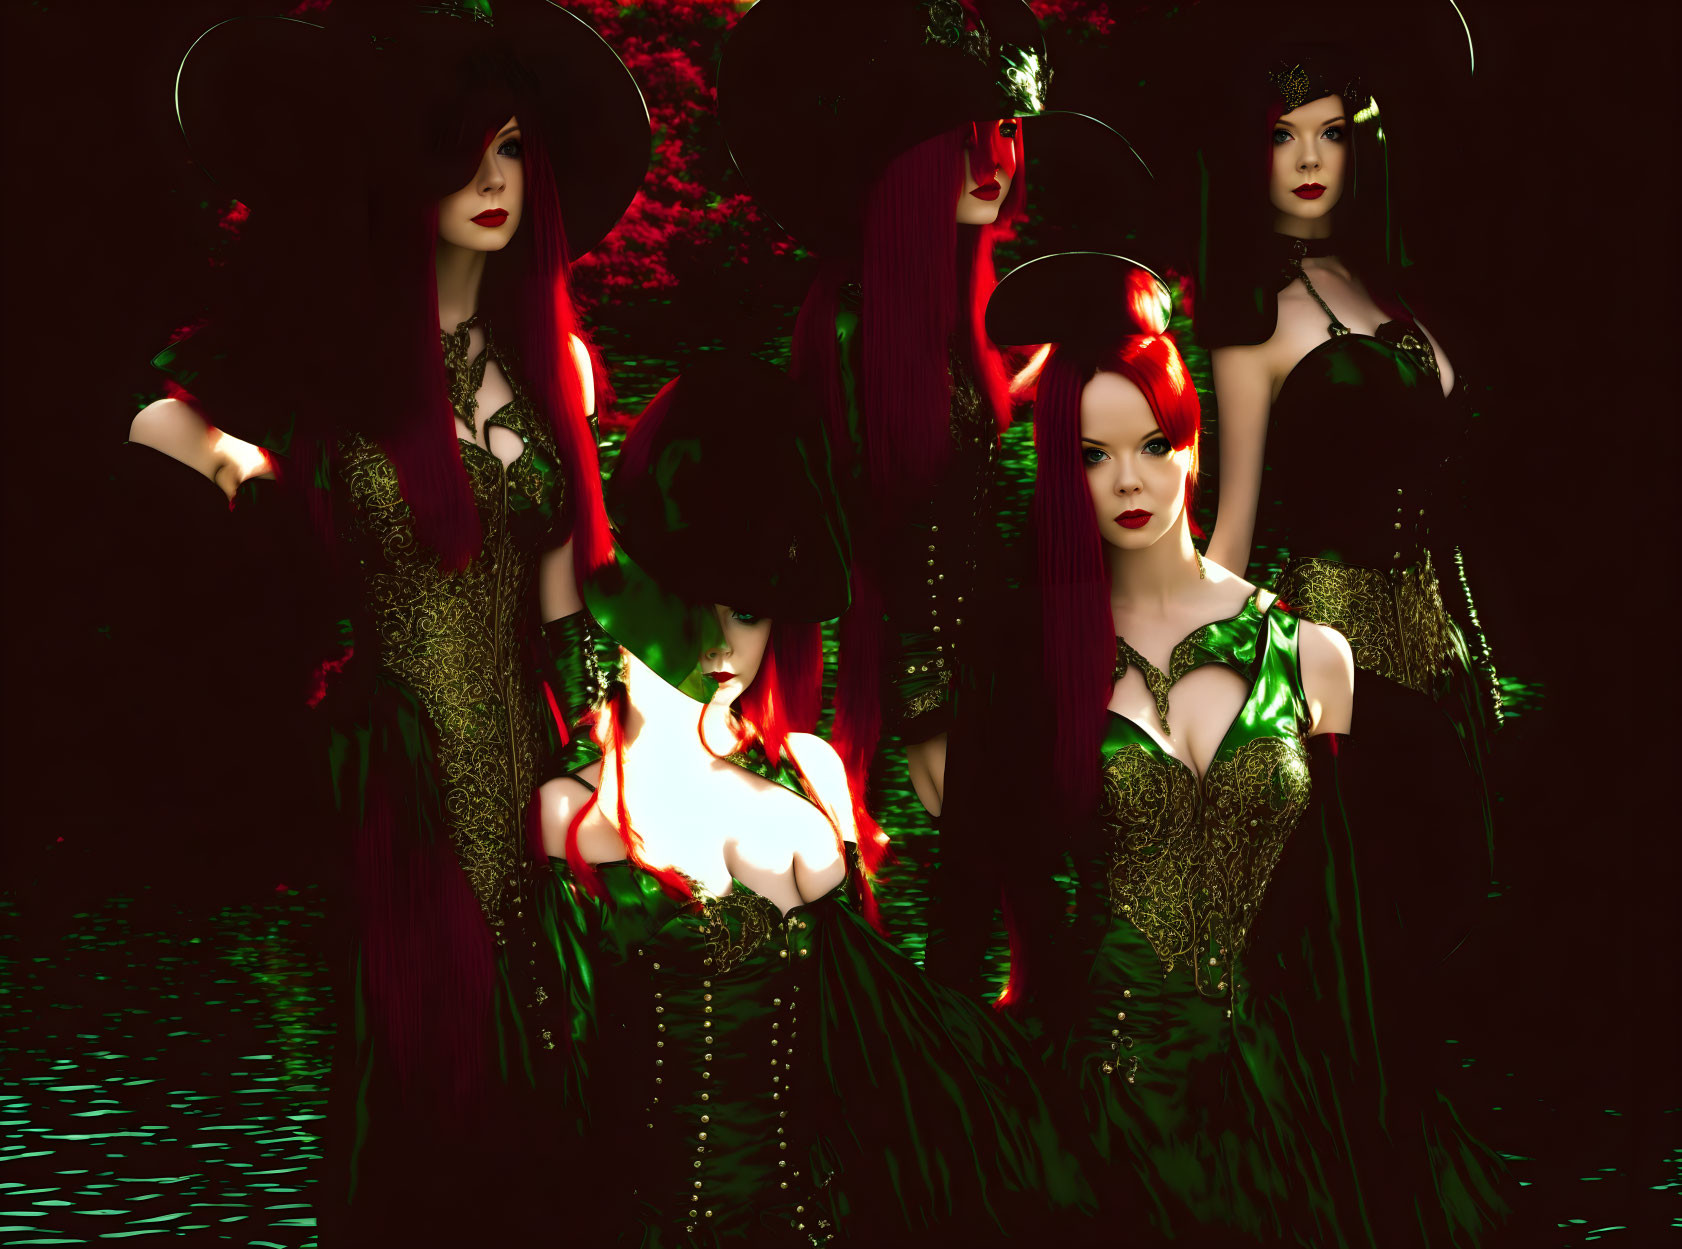 Four women in green medieval gowns and wide-brimmed hats in dark forest with green orb